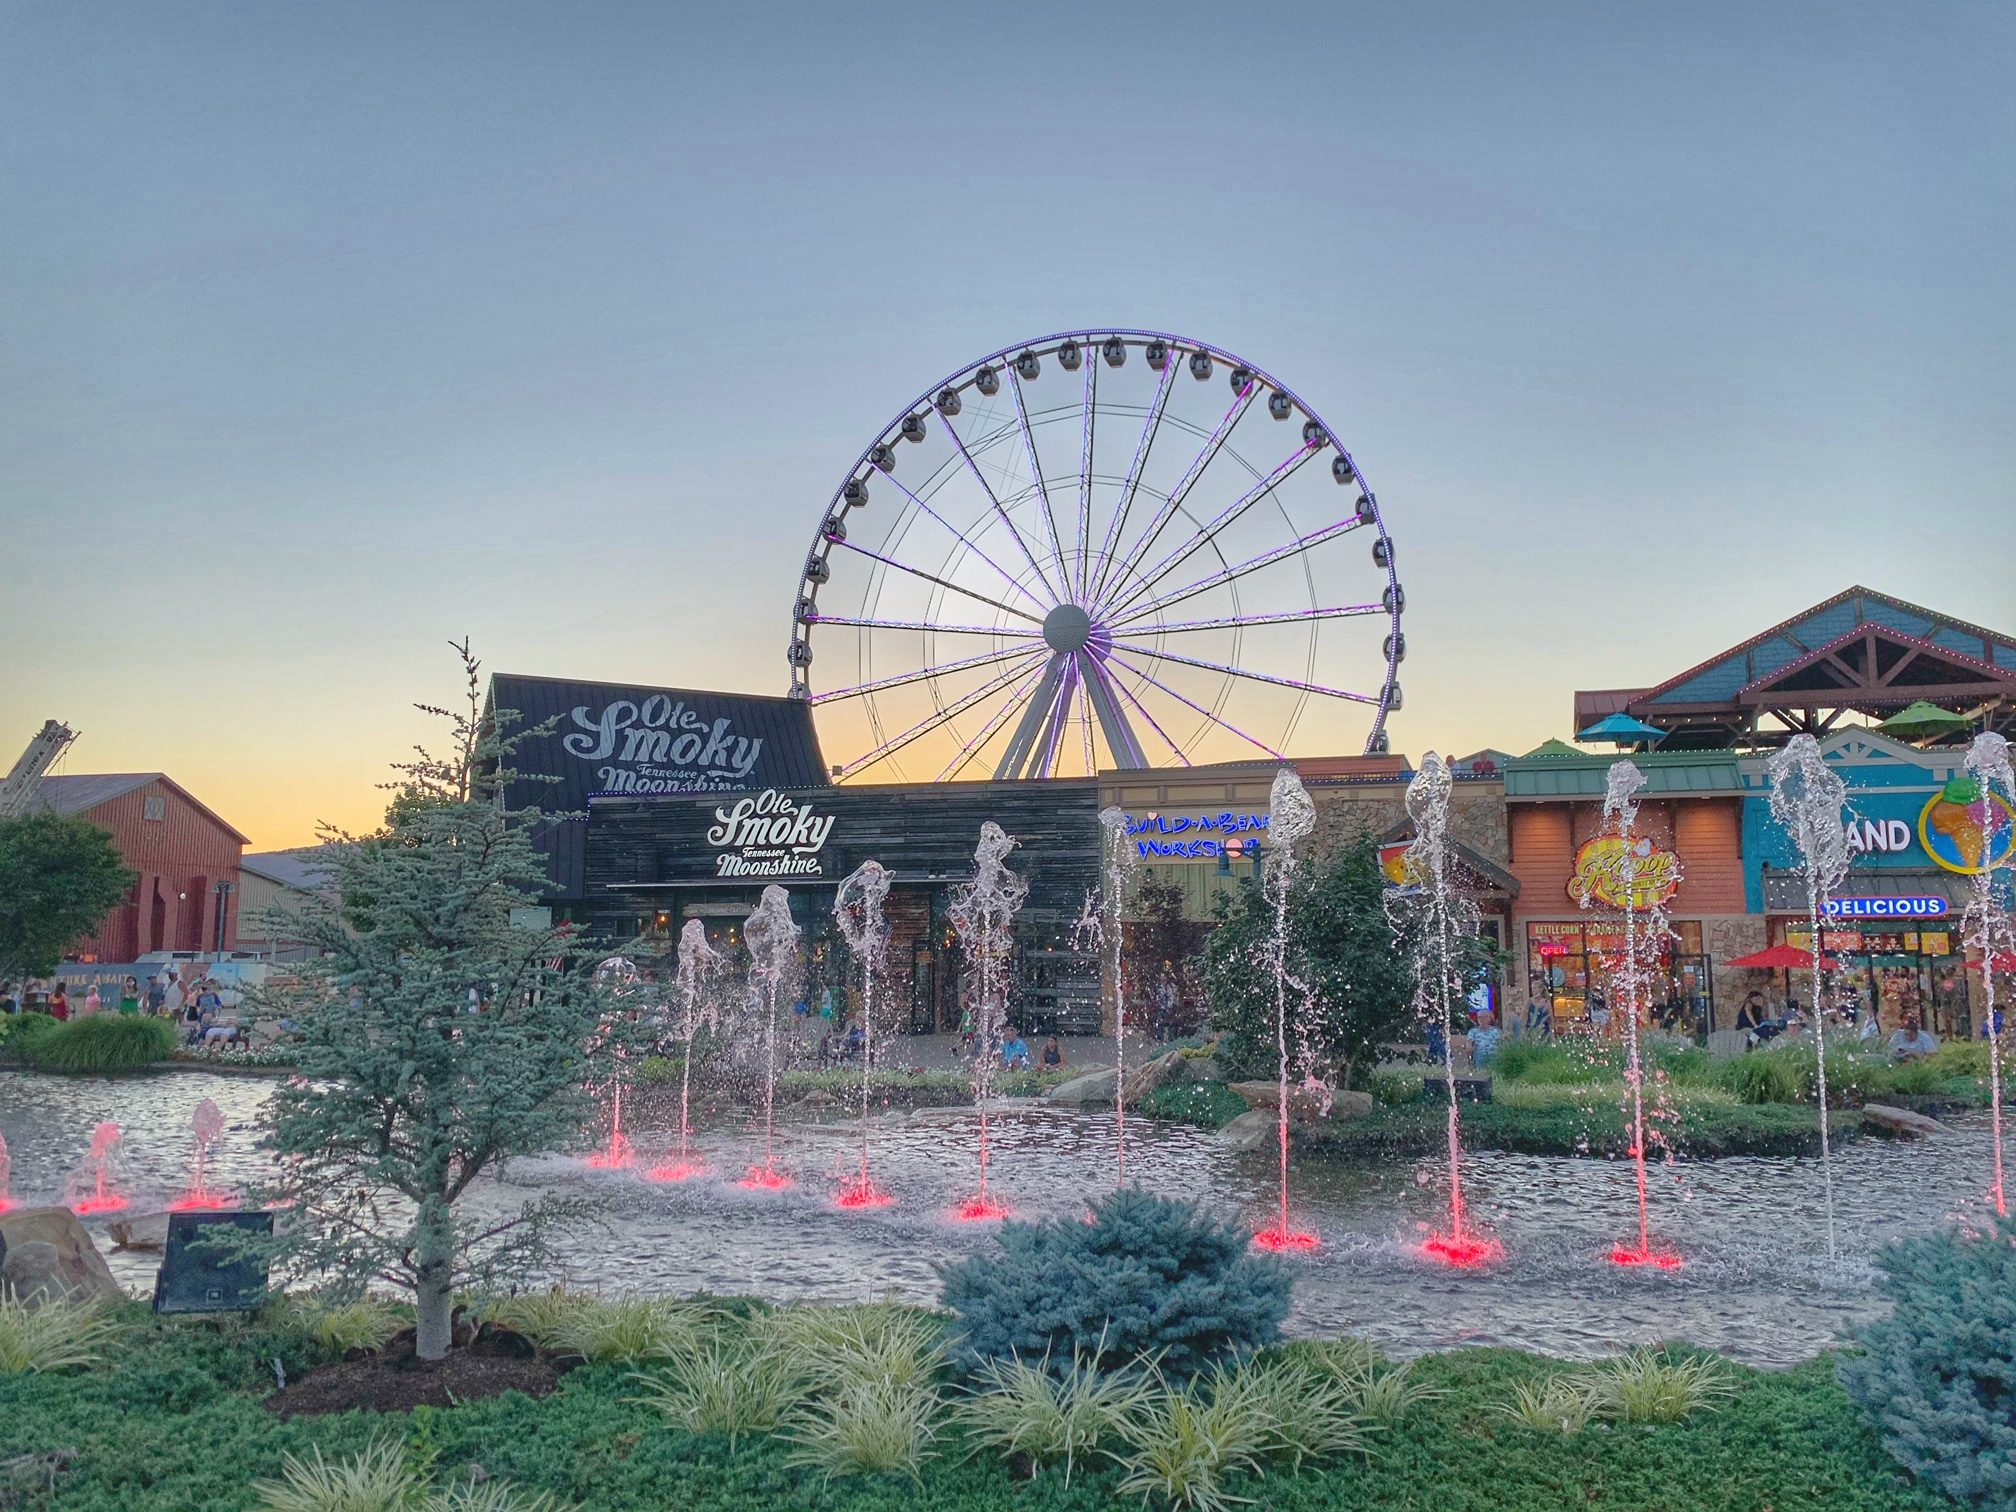 The Island Pigeon Forge Great Smoky Mountain Wheel at sunset